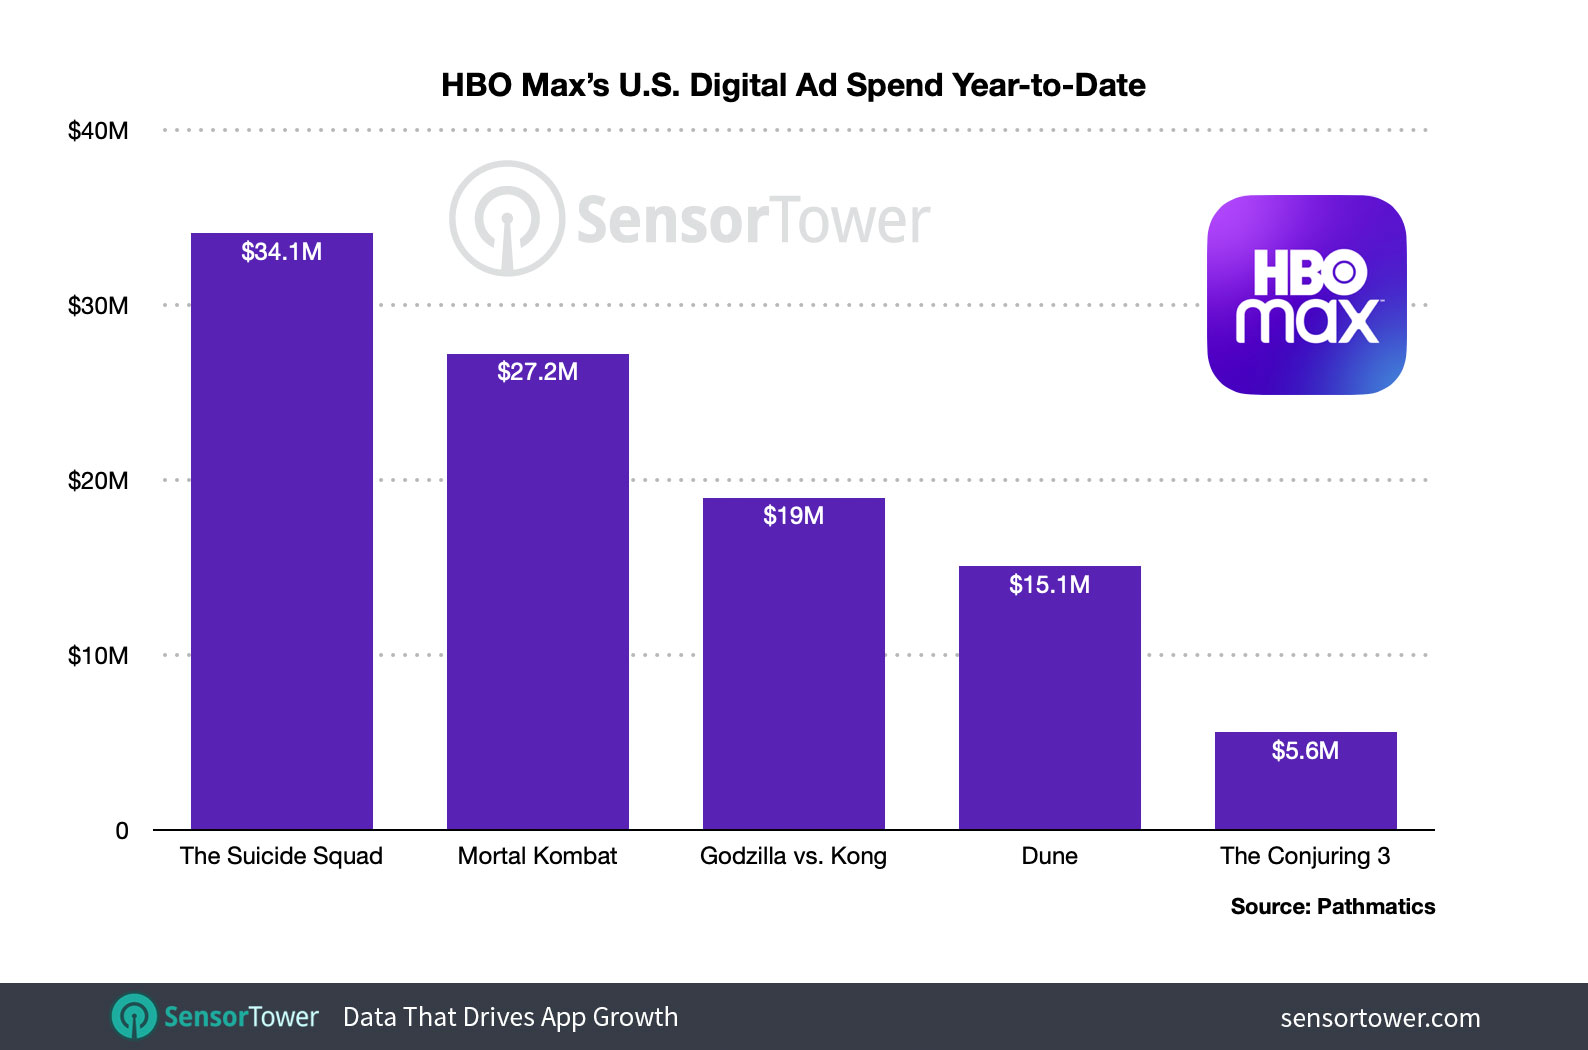 Comparison of HBO Max digital ad spend for movie premieres on its platform.